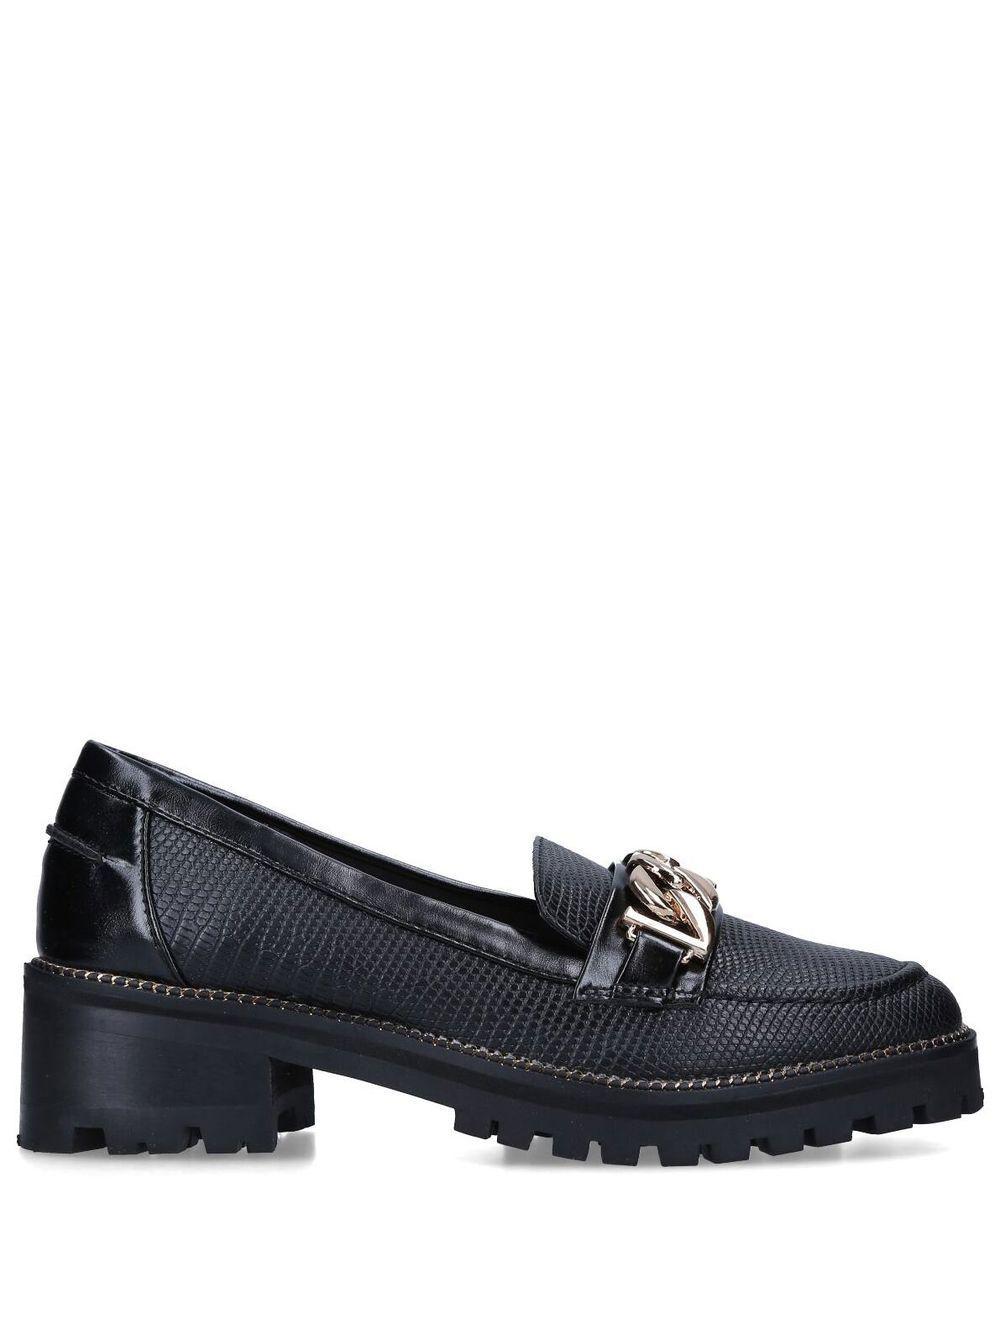 KG by Kurt Geiger Maddox Chain-link Loafers in Blue | Lyst